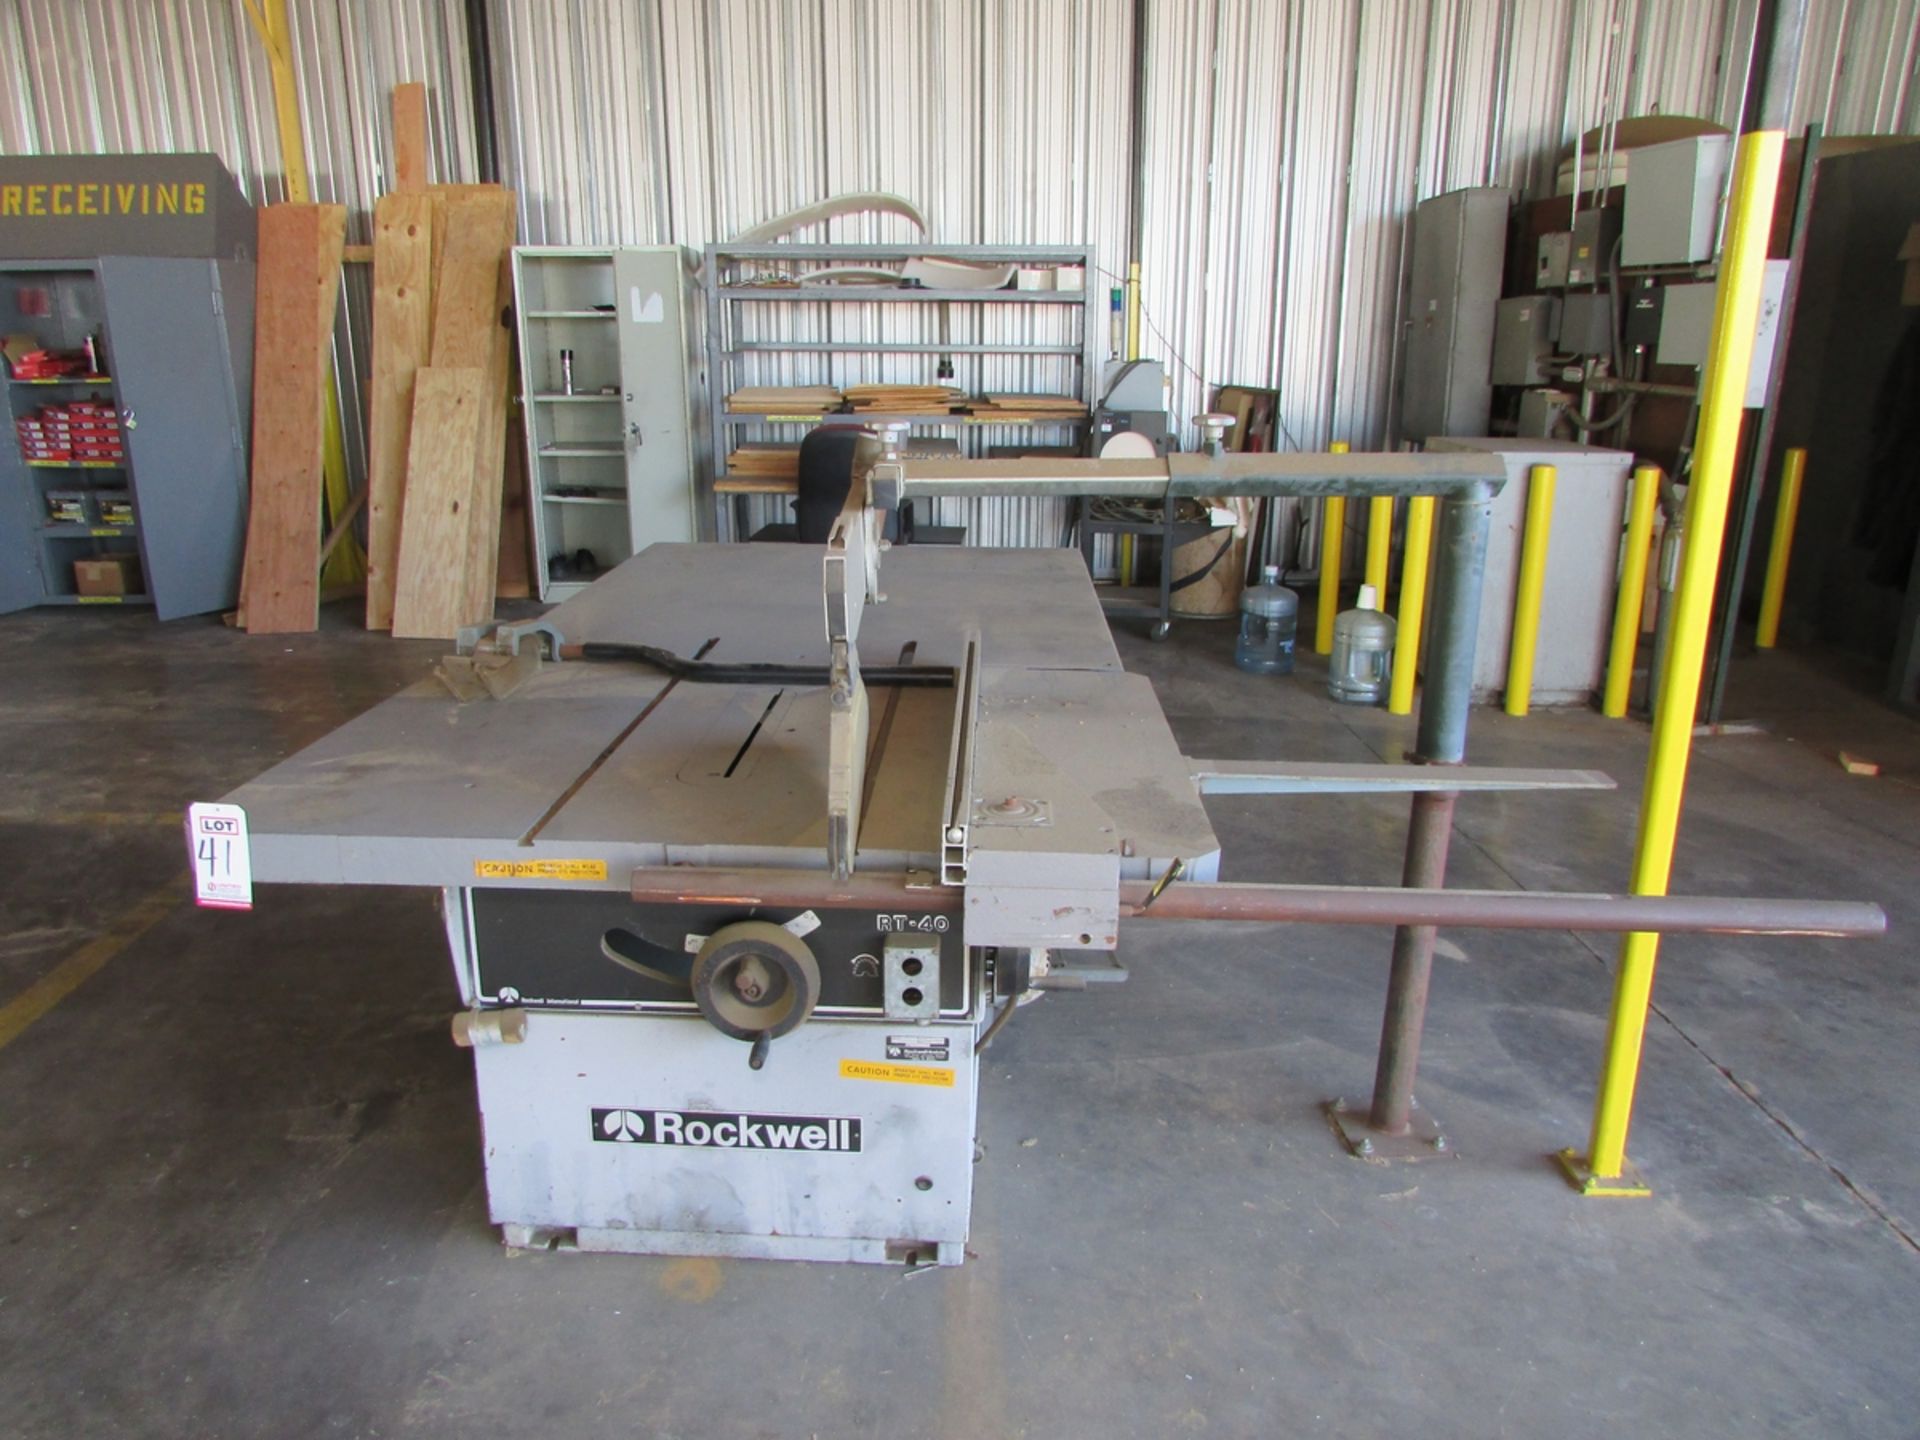 ROCKWELL INVICTA 12" TILTING ARBOR TABLE SAW, MODEL RT-40, S/N 1012, ALTENDORF WA107 GUARD, 60" X - Image 2 of 10